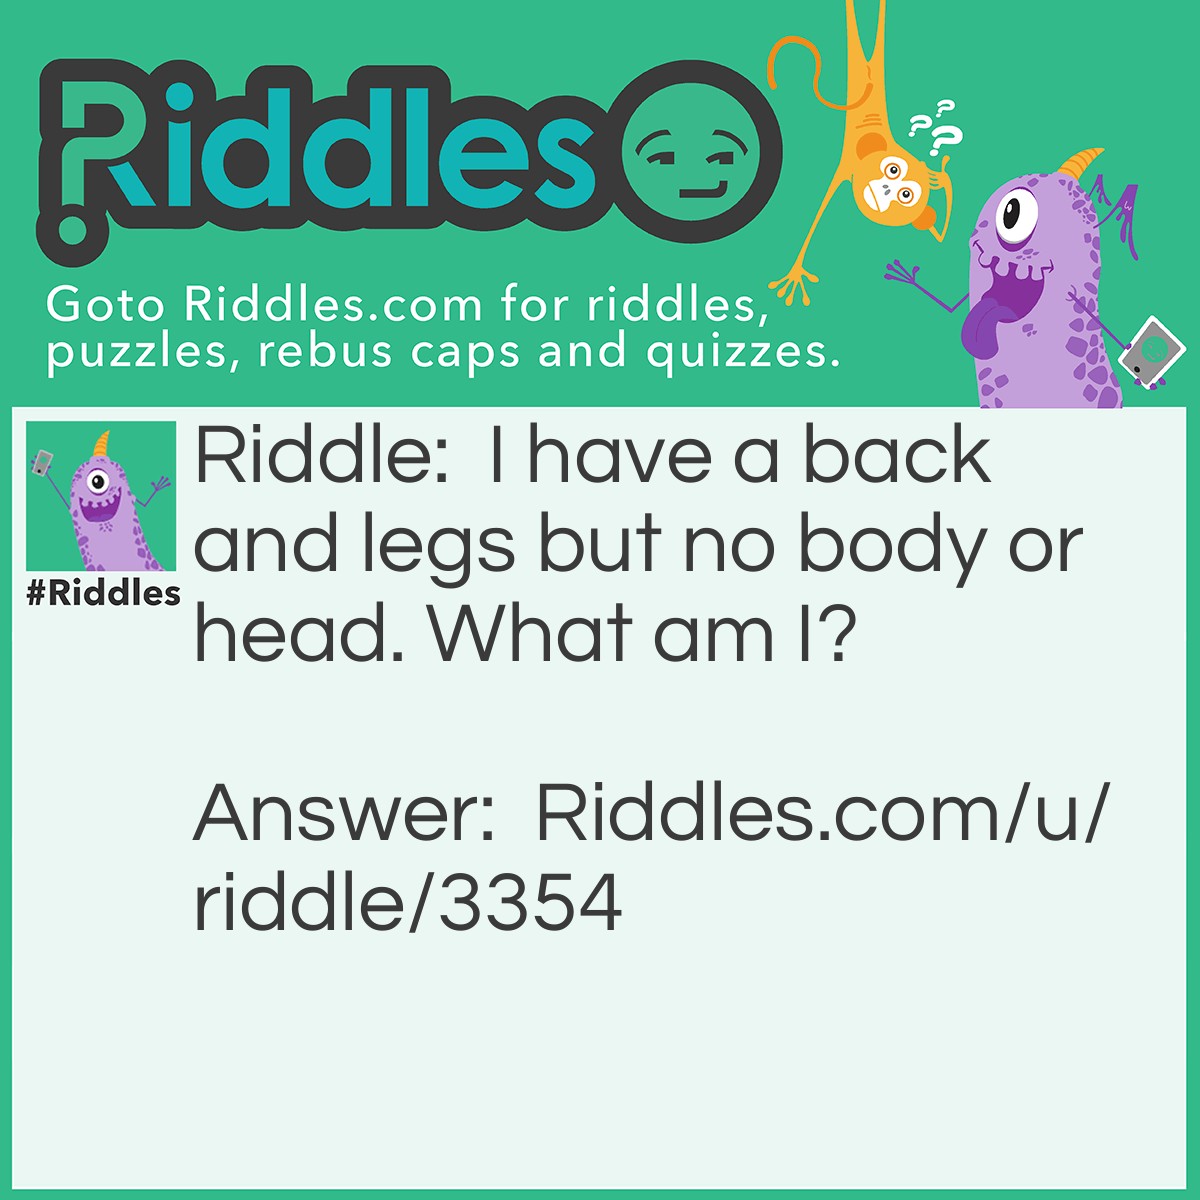 Riddle: I have a back and legs but no body or head. What am I? Answer: I'm a chair!!